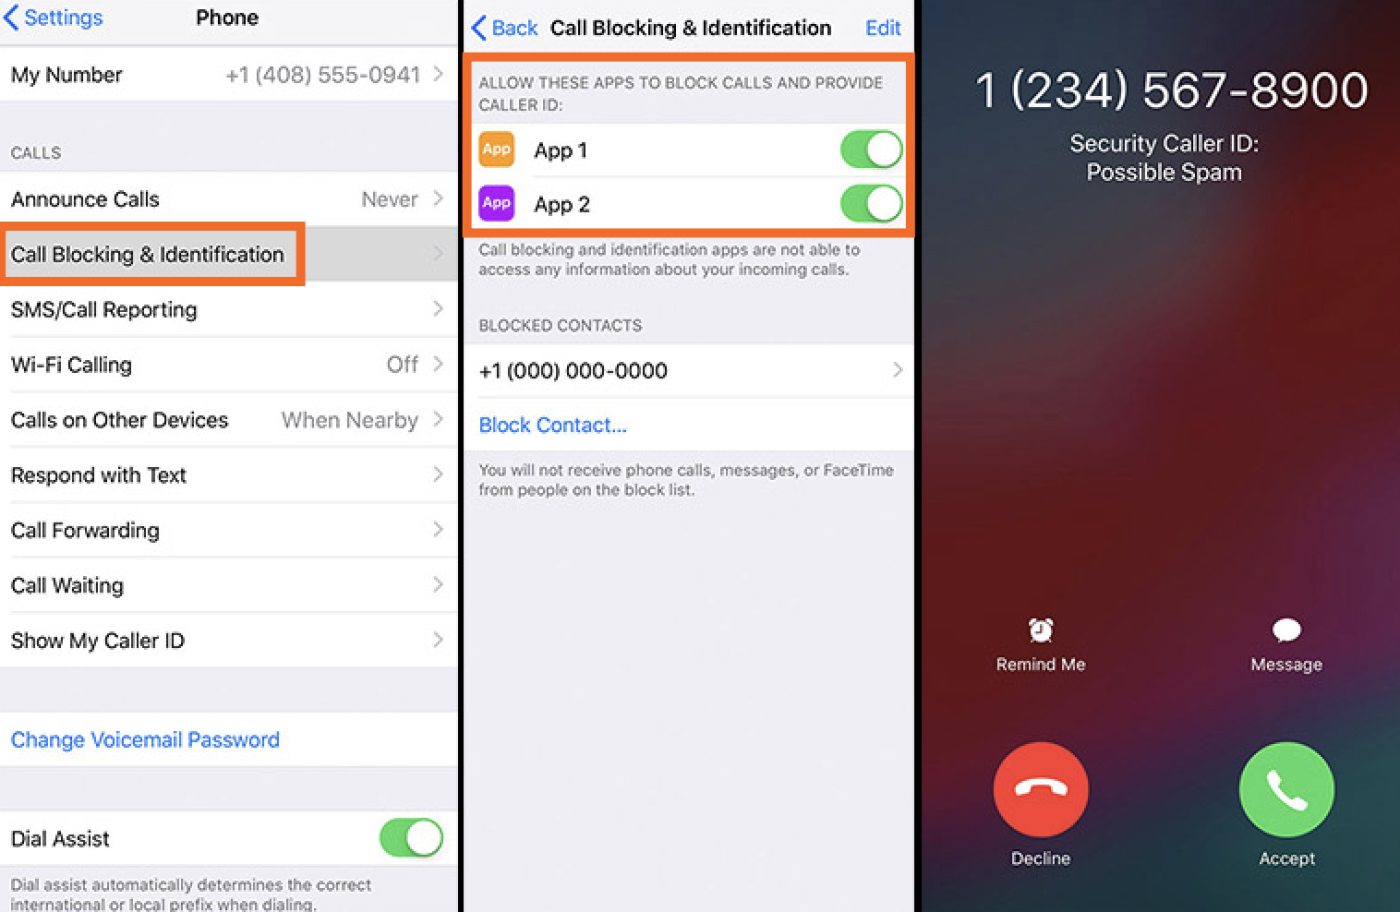 Enable spam call blocking on your iPhone